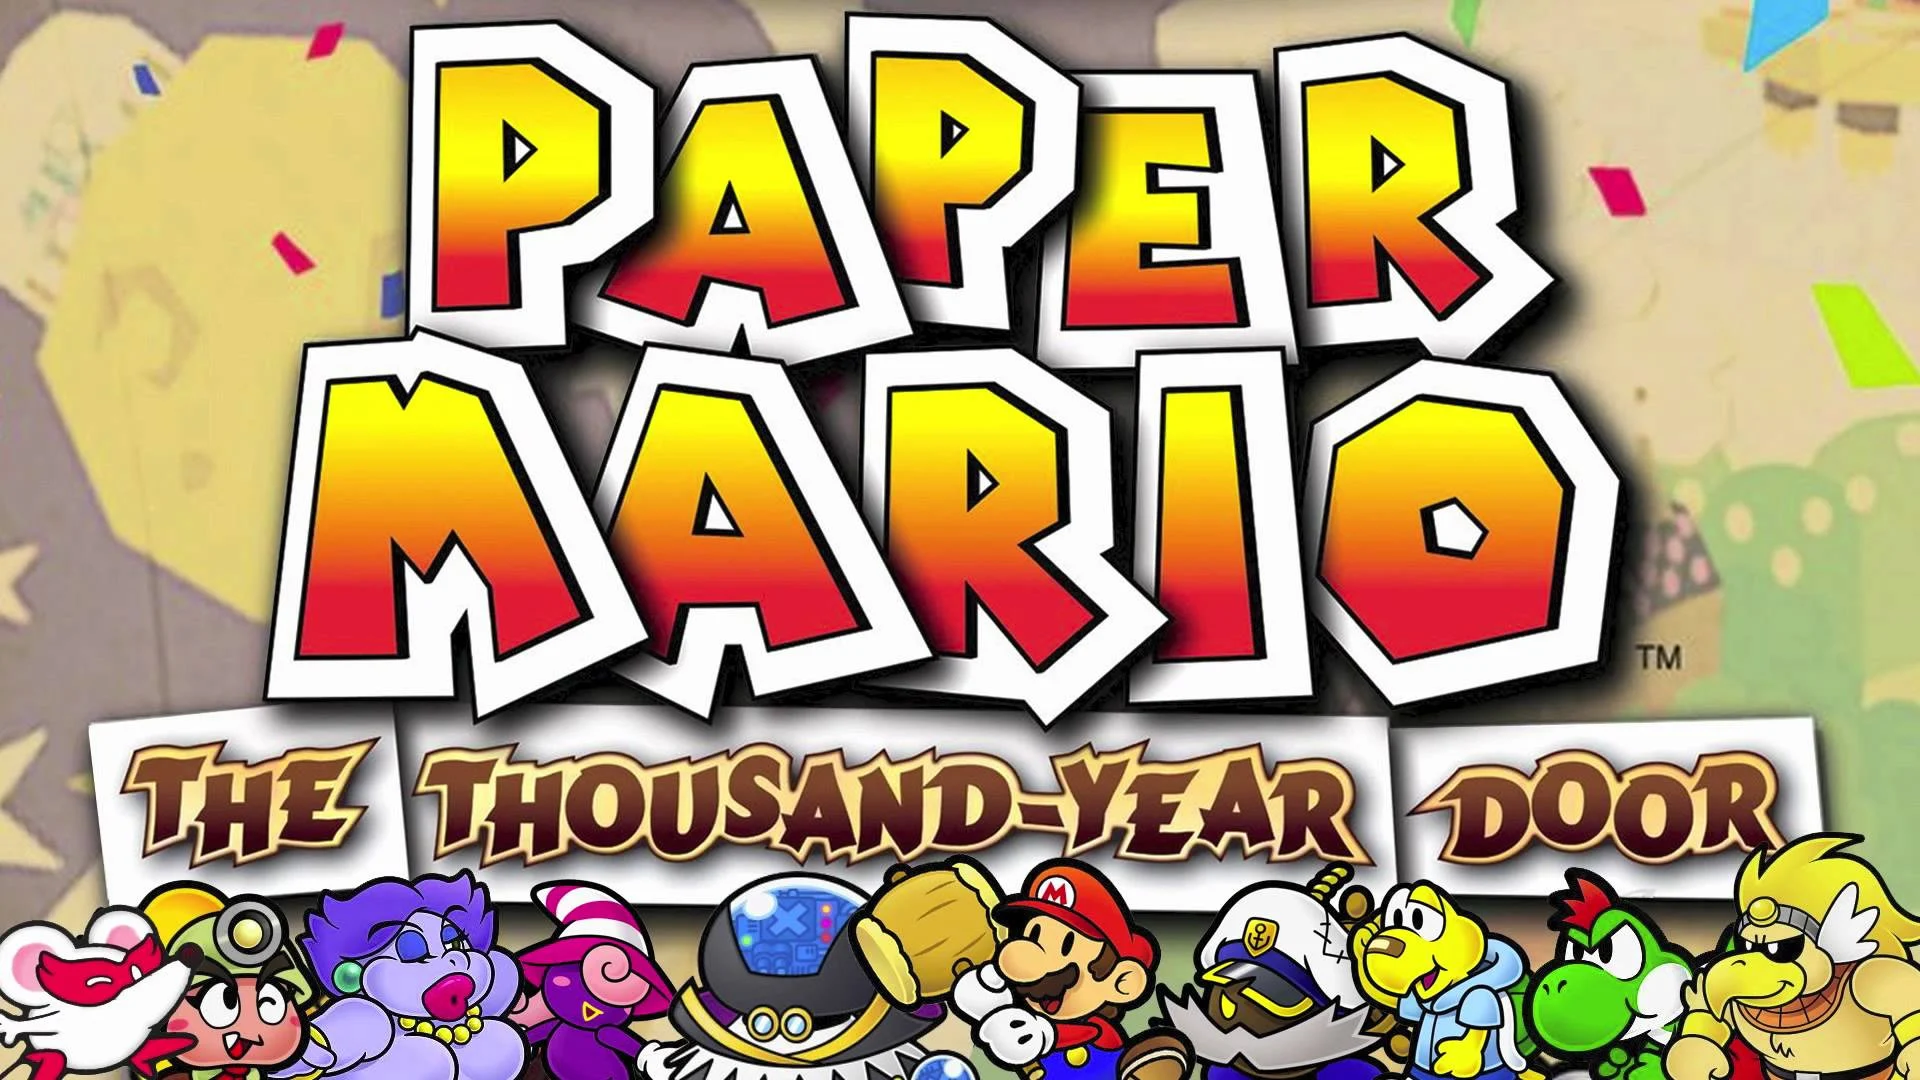 Paper Mario: The Thousand-Year Door has been assessed by the ESRB